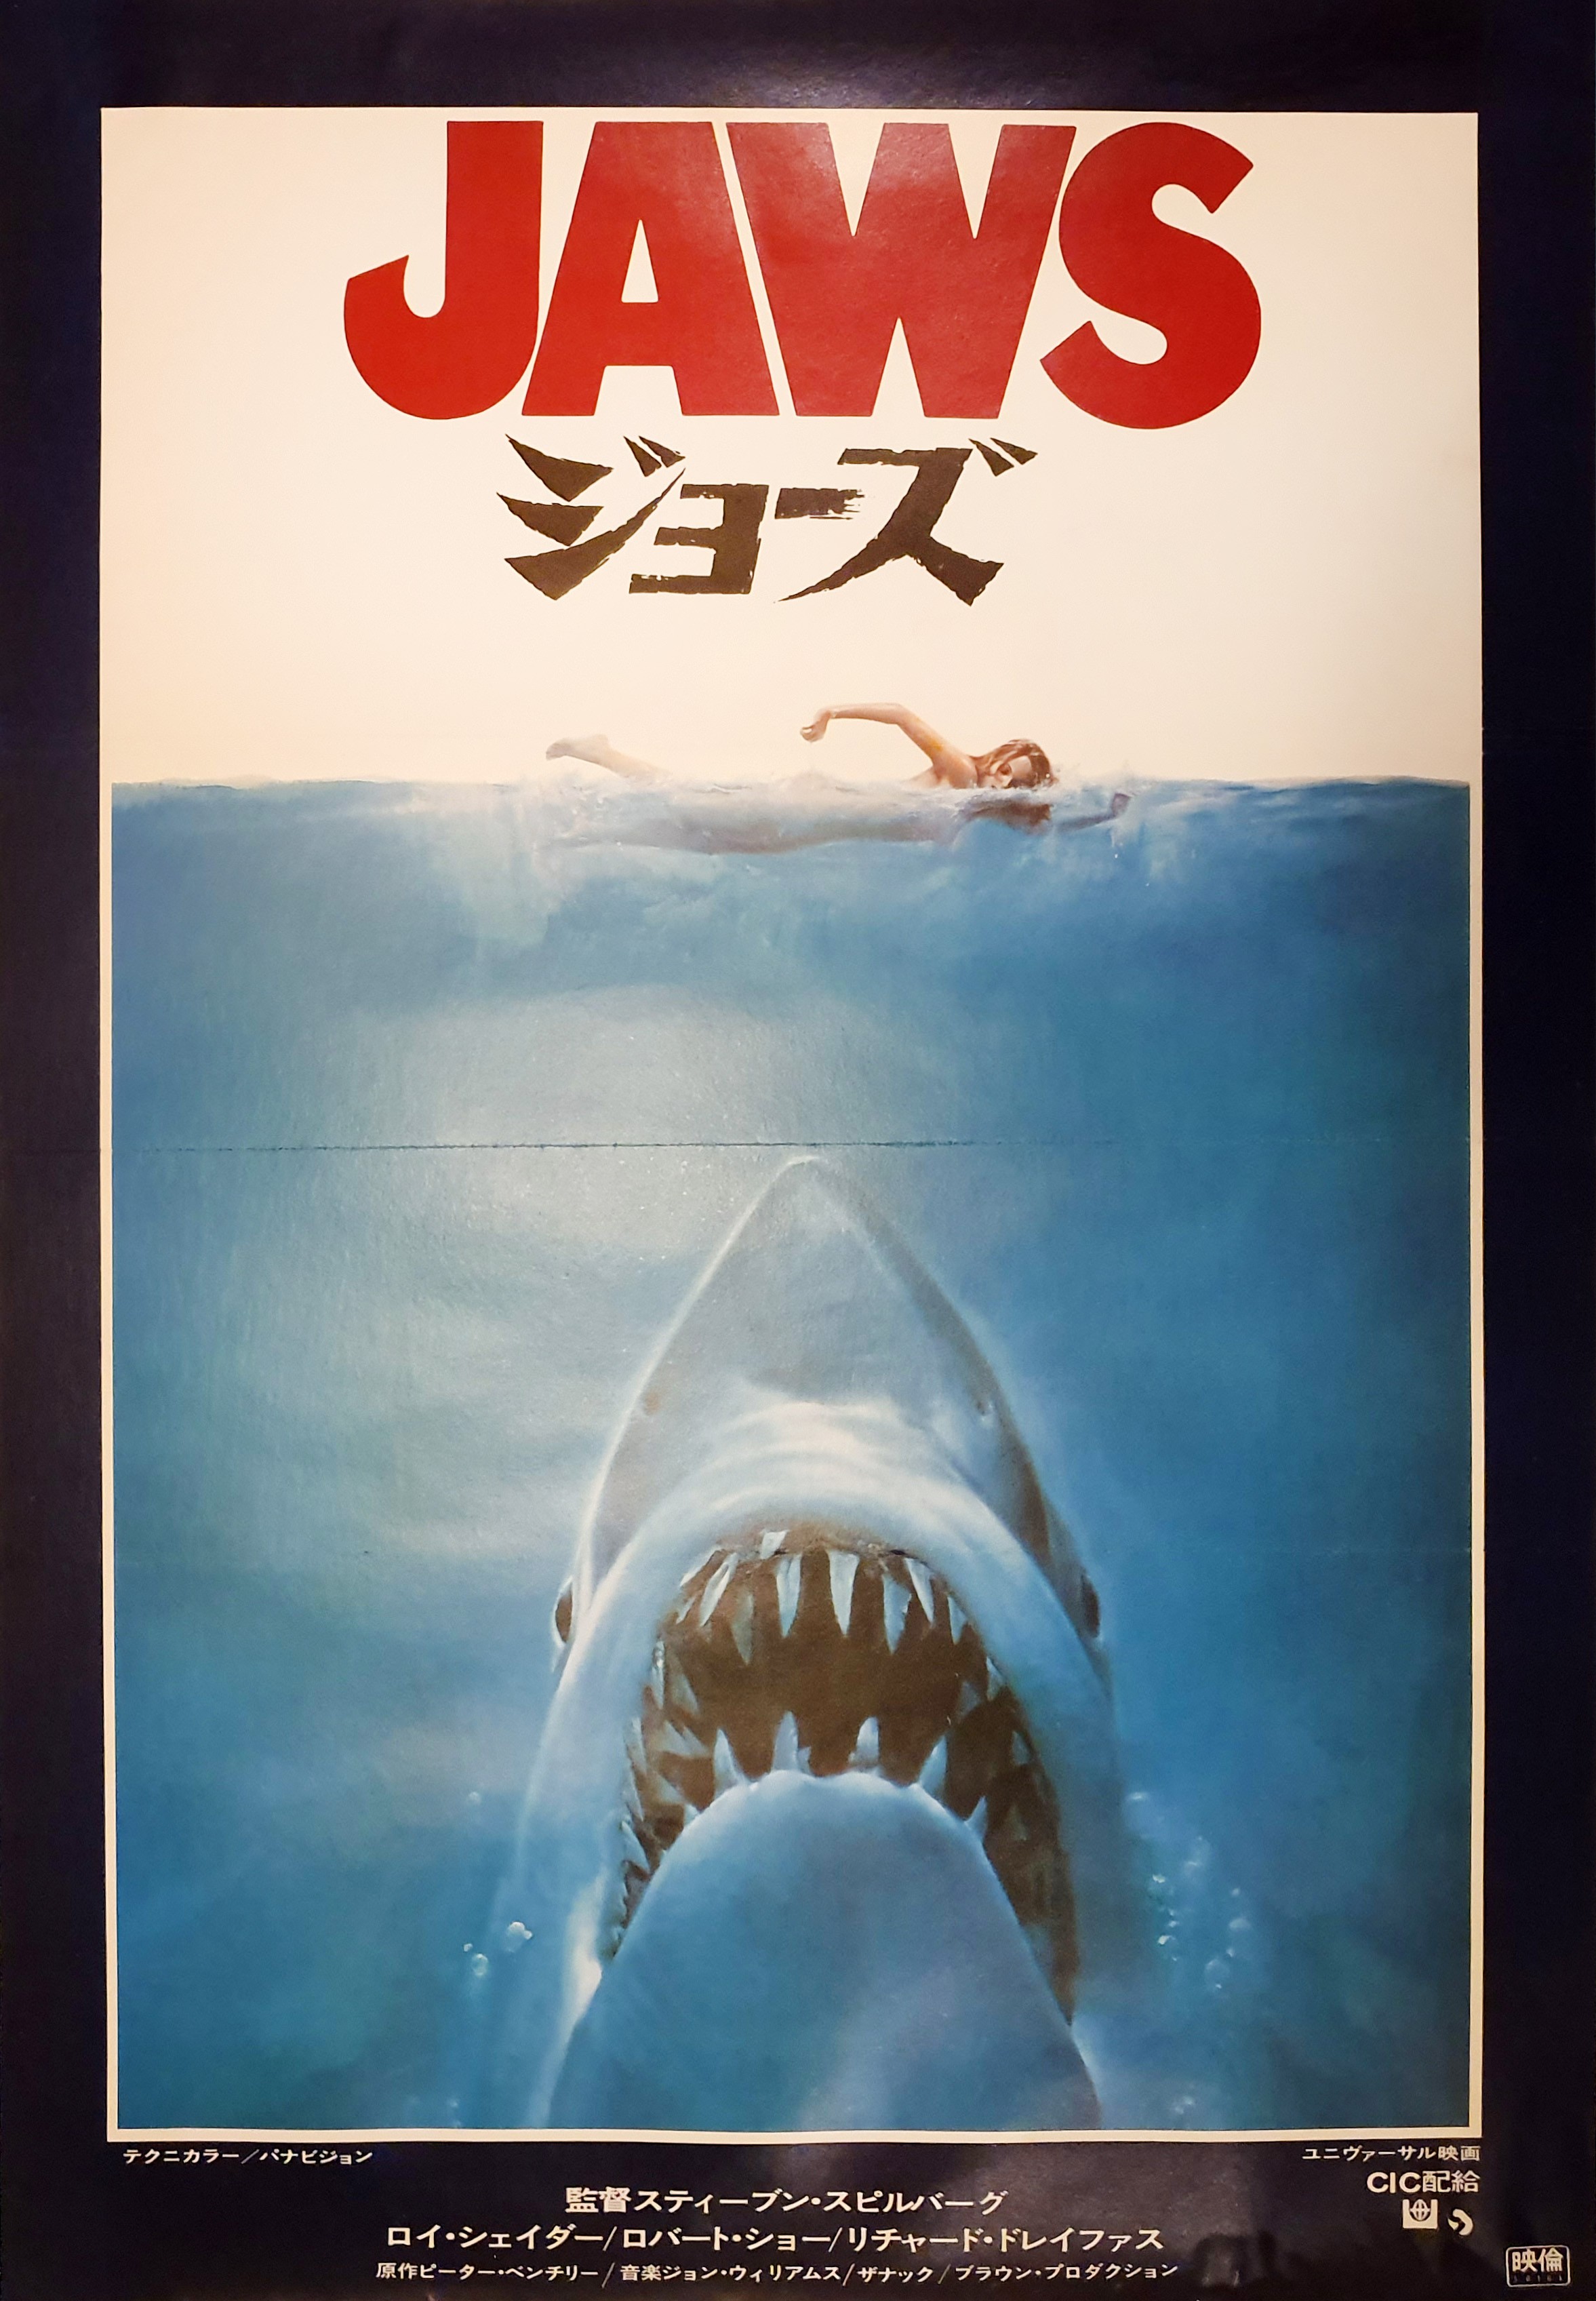 jaws movie poster 1975